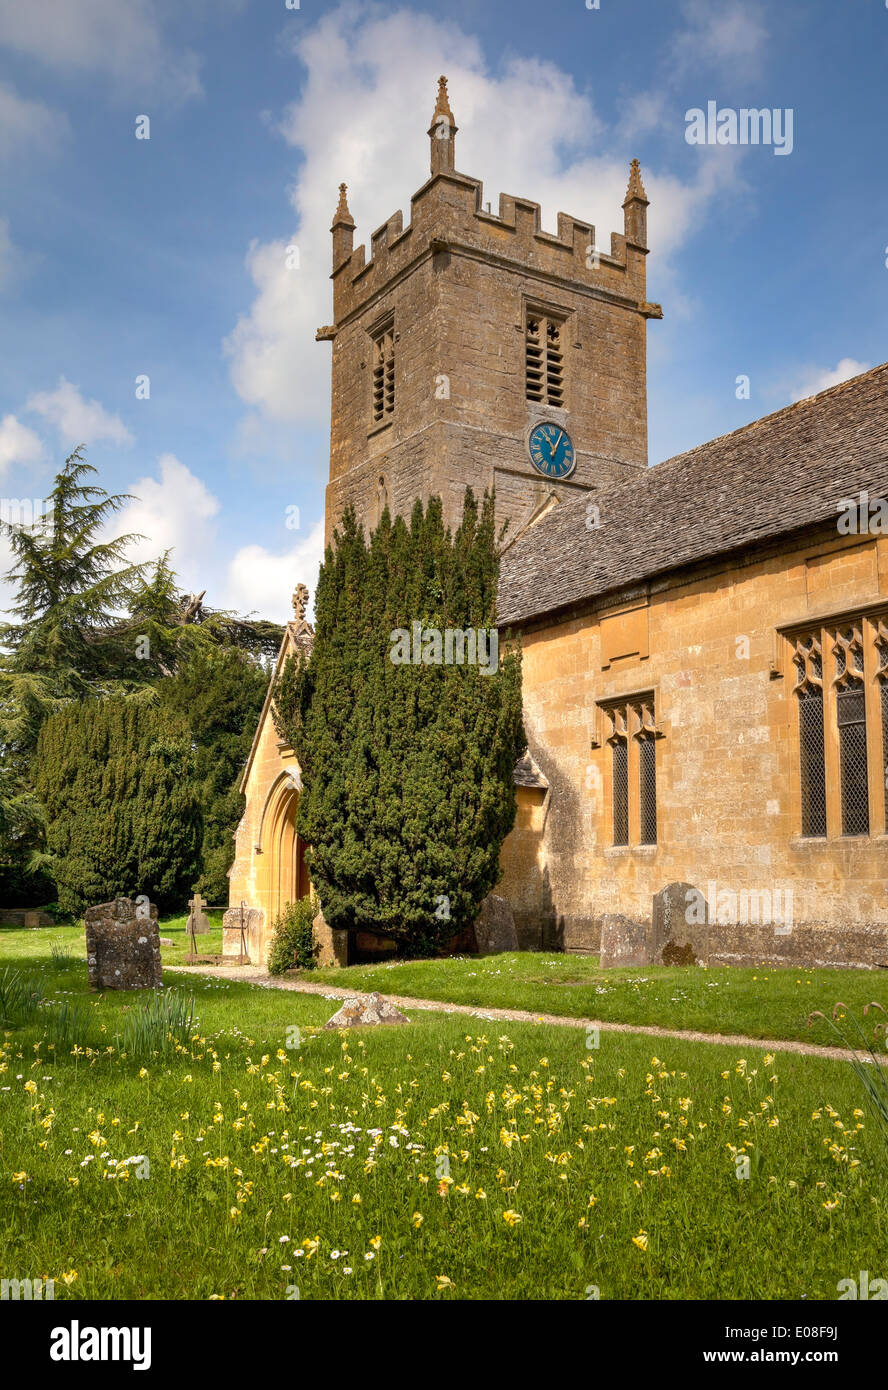 St Peter church, Stanway, Gloucestershire, England. Stock Photo